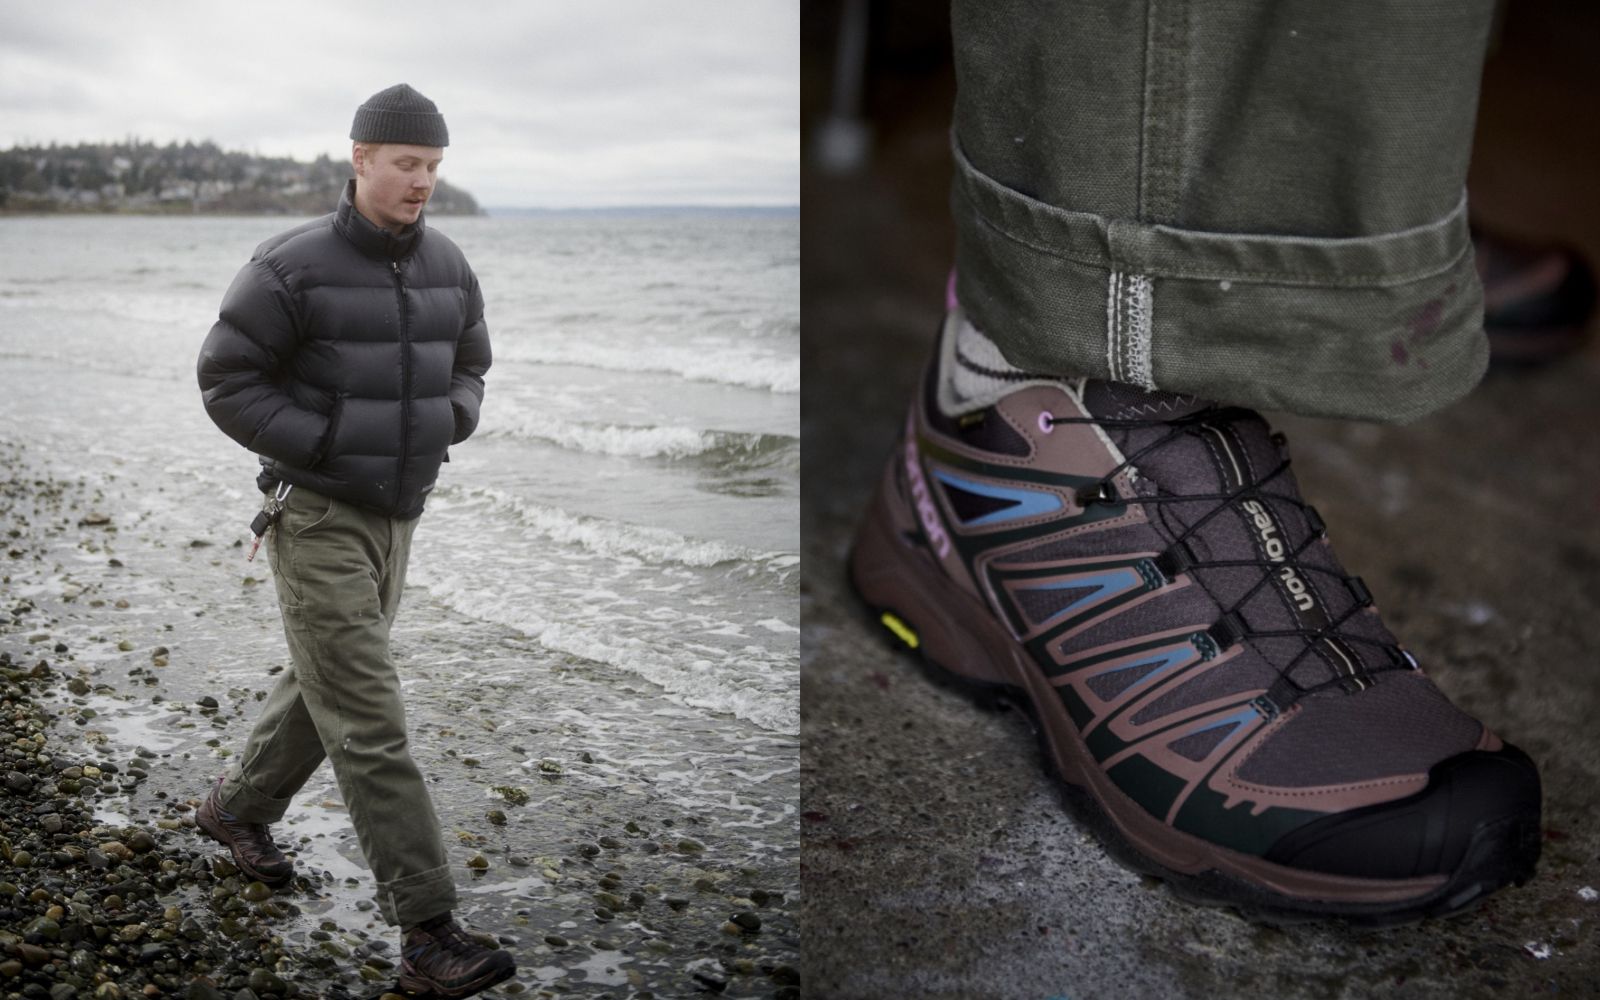 Canadian hiking aesthetic in the Salomon Advanced x Better™ Gift